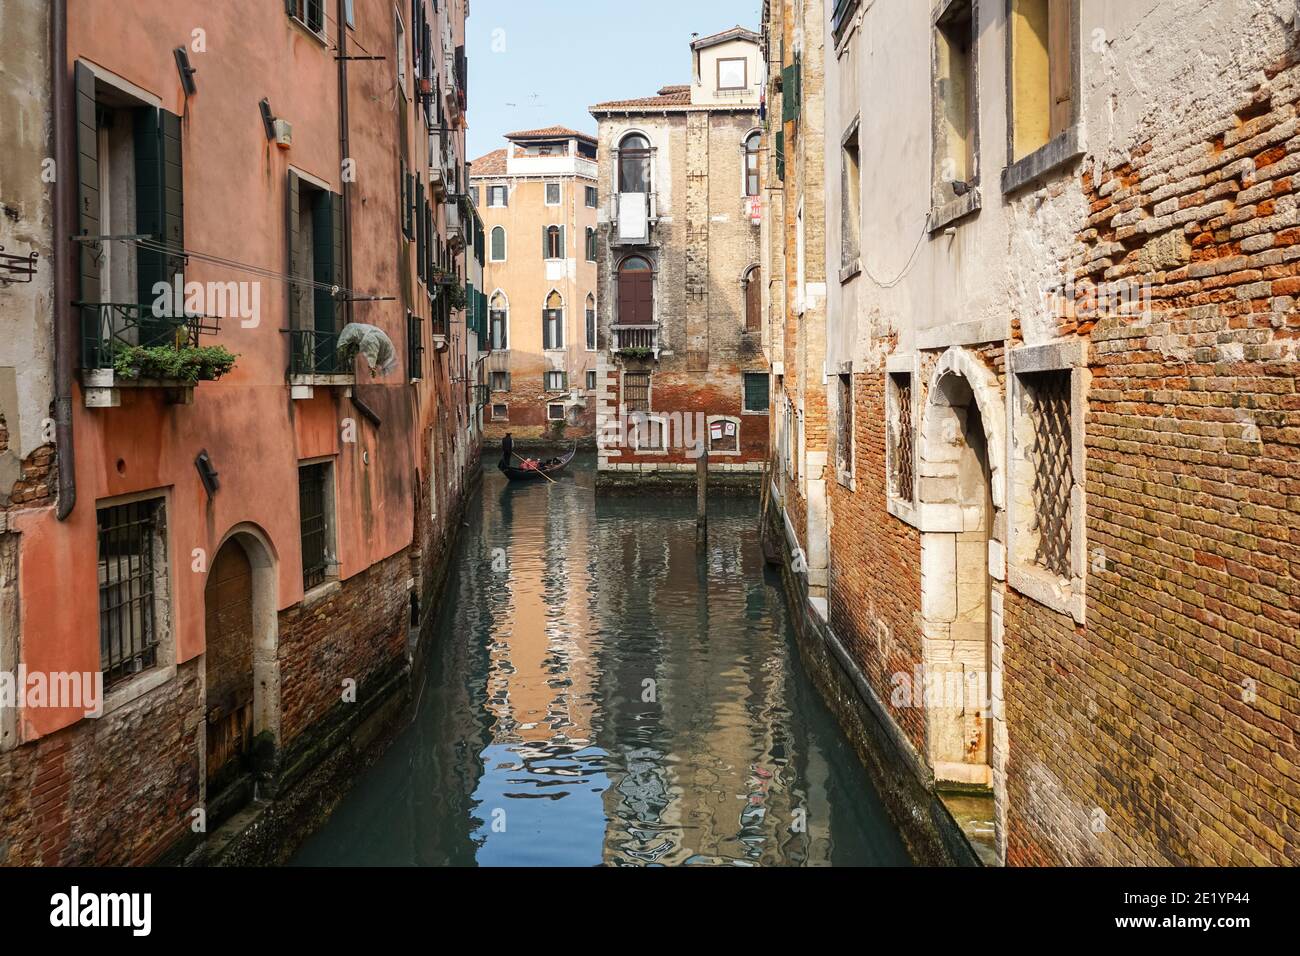 Old traditional Venetian buildings on the rio della Fava canal in Venice, Italy Stock Photo